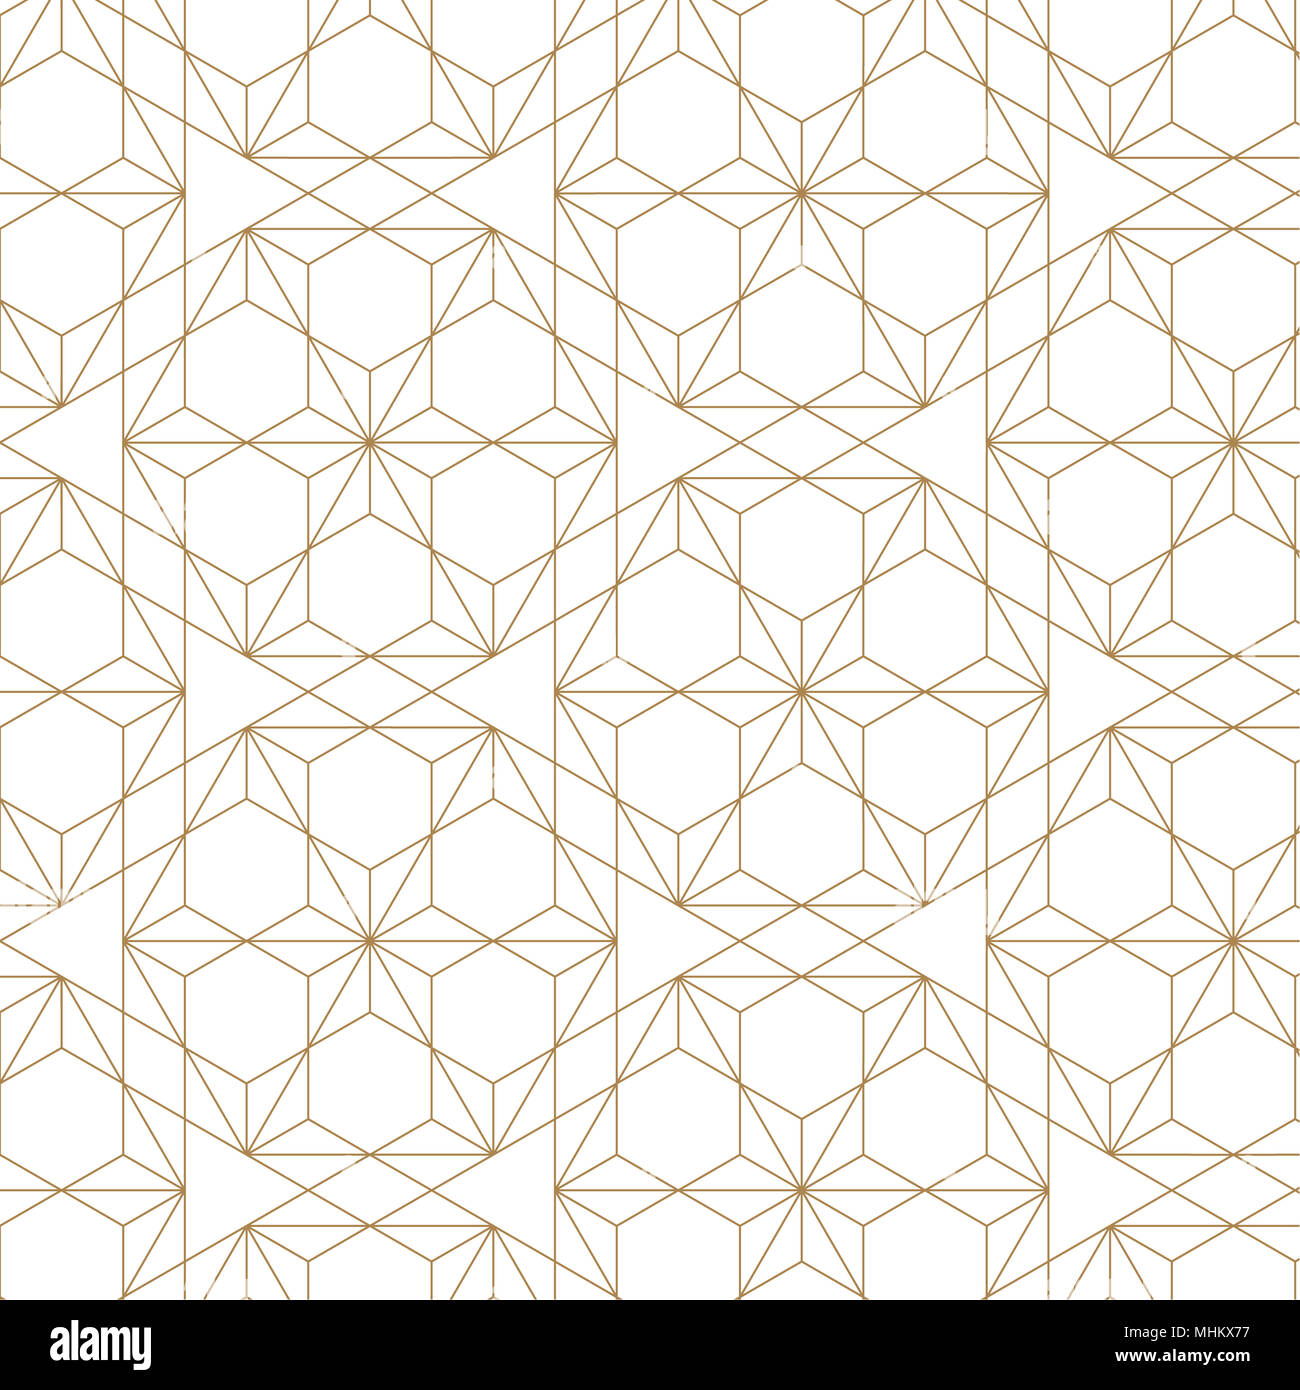 Japanese pattern vector. Gold geometric background texture. Stock Photo